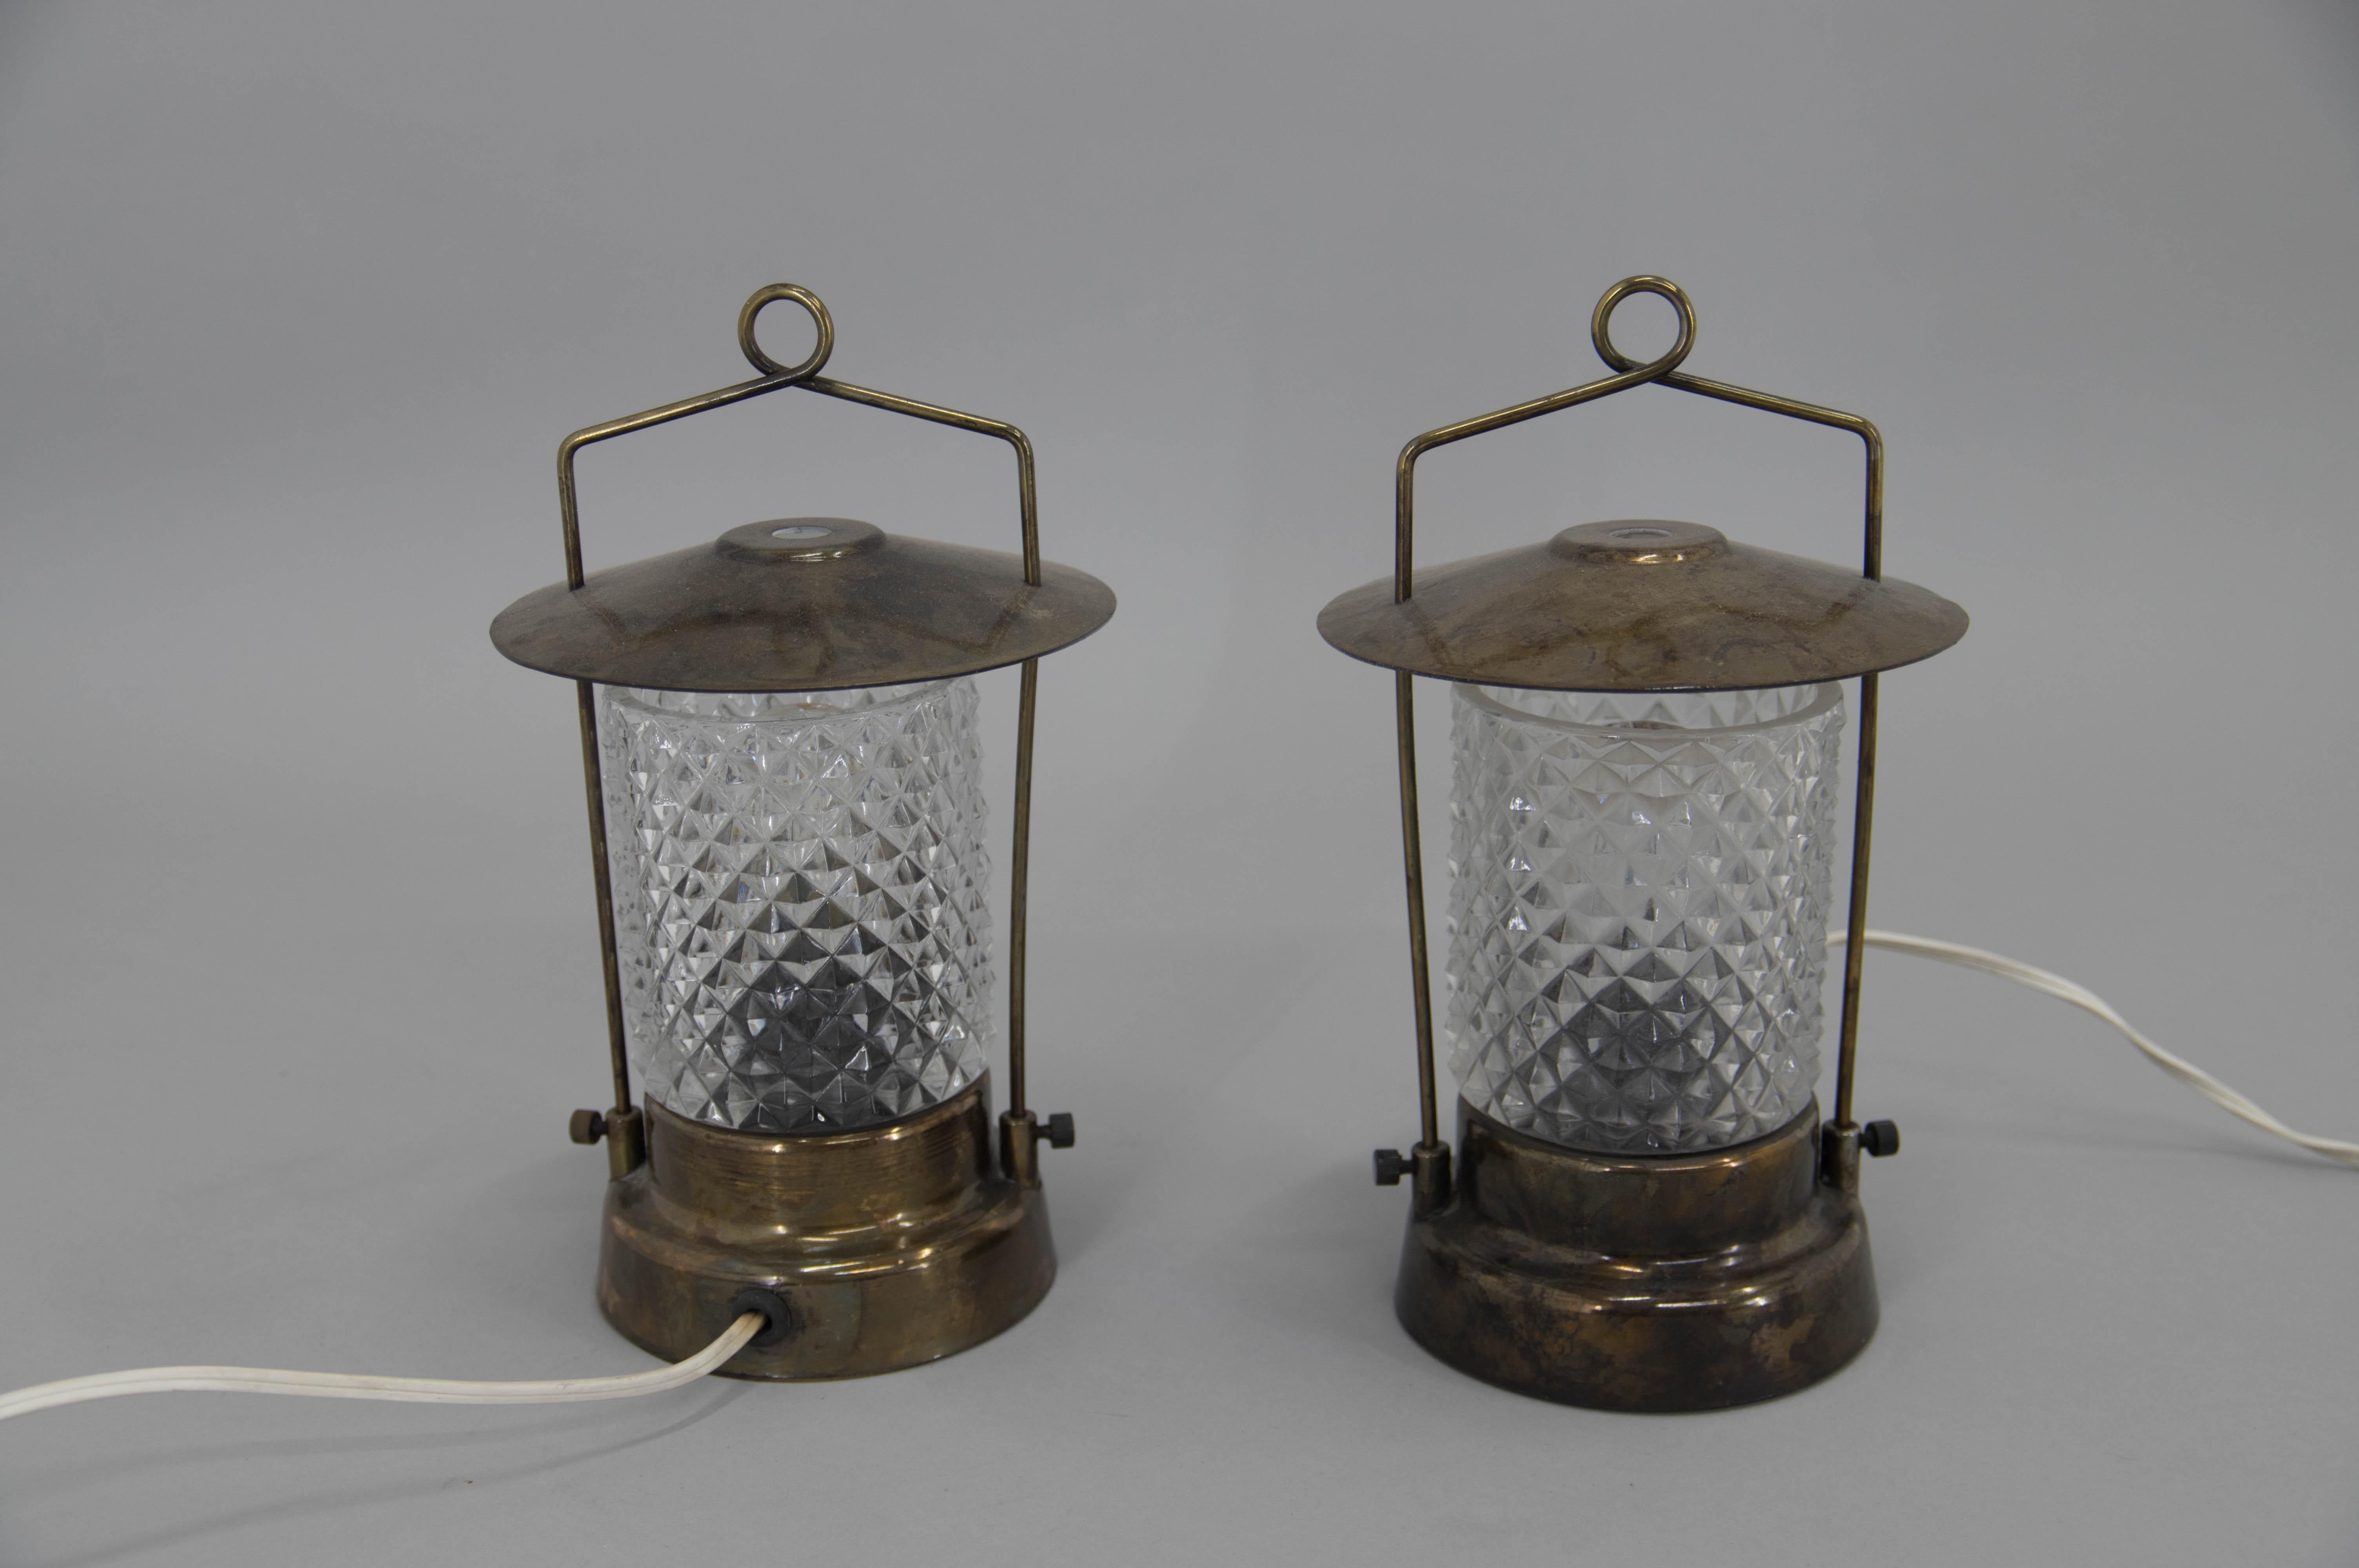 Set of two table lamps made in 1970s in Czechoslovakia.
Very good original condition.
1x40W, E25-E27 bulb
US plug adapter included.